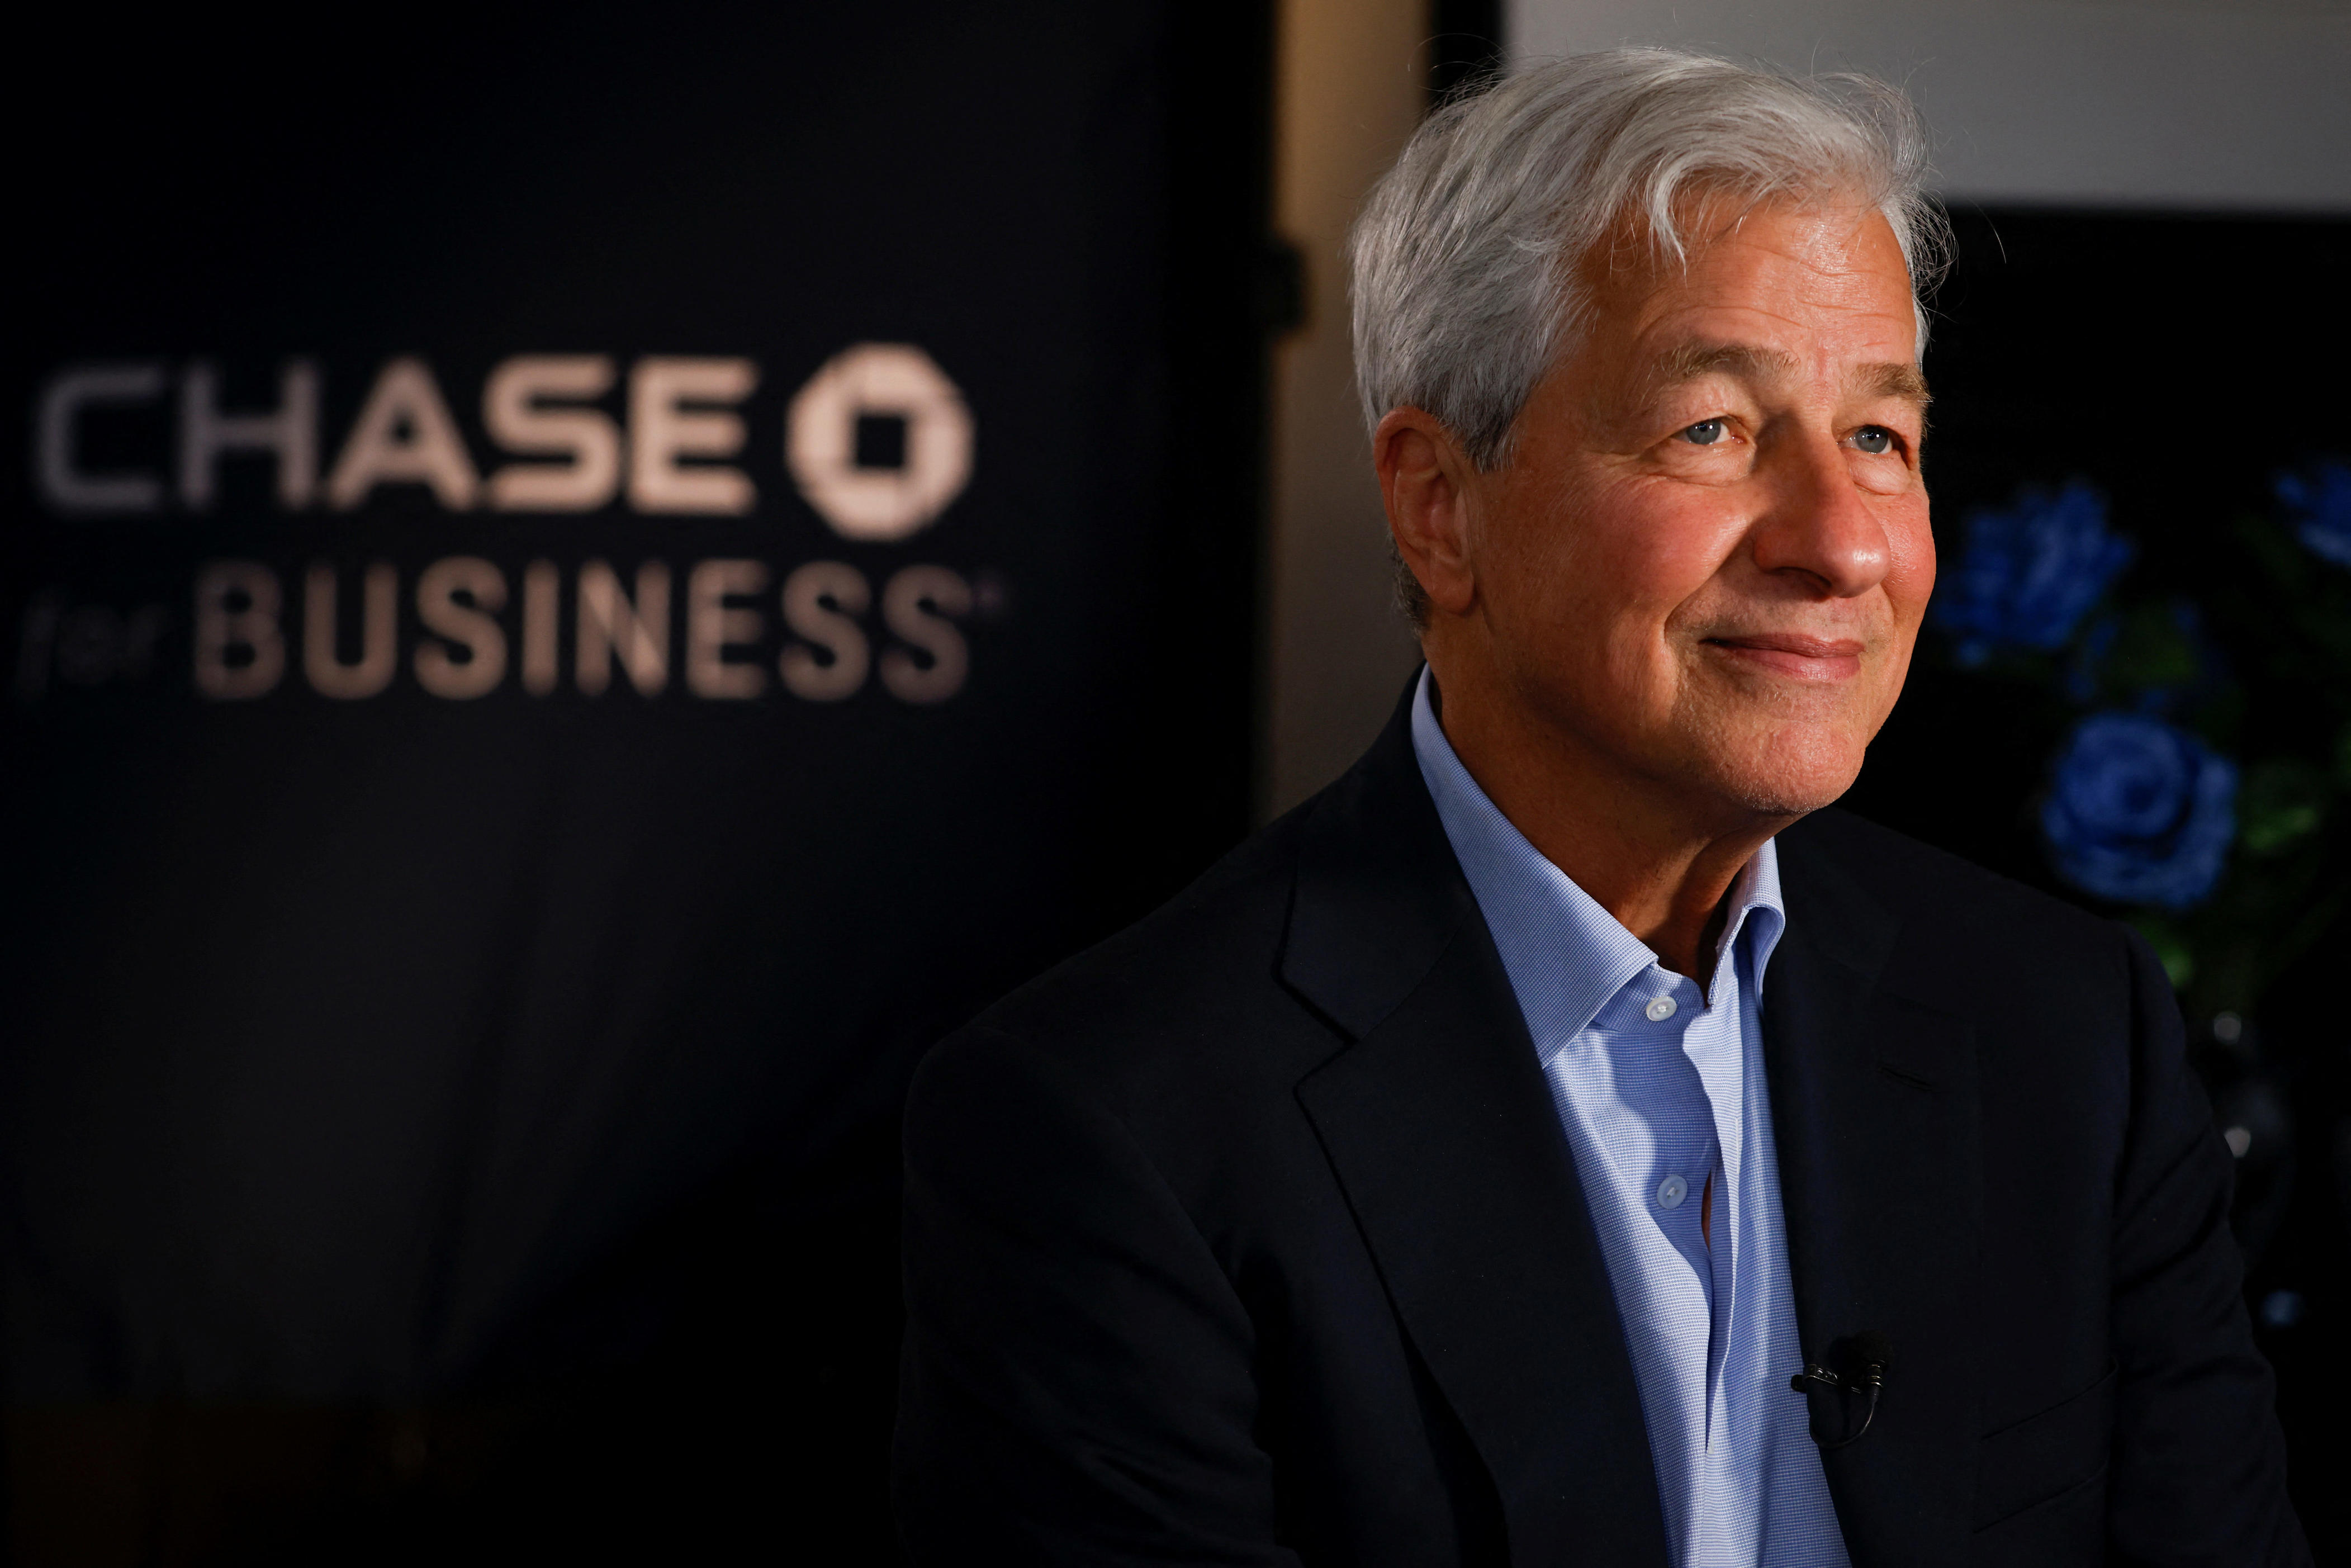 <p>JPMorgan announced this week that it is slashing 500 roles, <a href="https://www.cnbc.com/2023/05/26/job-cuts-jpmorgan-chase-cut-about-500-tech-and-ops-jobs-.html">CNBC reported.</a></p><p>The cuts are expected to spread across JPMorgan's retail and commercial banking, asset and wealth management, and corporate and investment banking operations, according to CNBC.</p><p>The reported layoffs come just a day after <a href="https://www.businessinsider.com/jpmorgan-lays-off-first-republic-employees-1000-workers-2023-5">reports</a> that JPMorgan laid off 1,000 First Republic employees, or about 15% of its workforce. JPMorgan, the largest bank in the US, got even larger earlier this month <a href="https://www.businessinsider.com/first-republic-bank-taken-jpmorgan-fdic-fails-find-buyer-2023-5">when it acquired the assets</a> of failing First Republic after it was seized by regulators.</p>